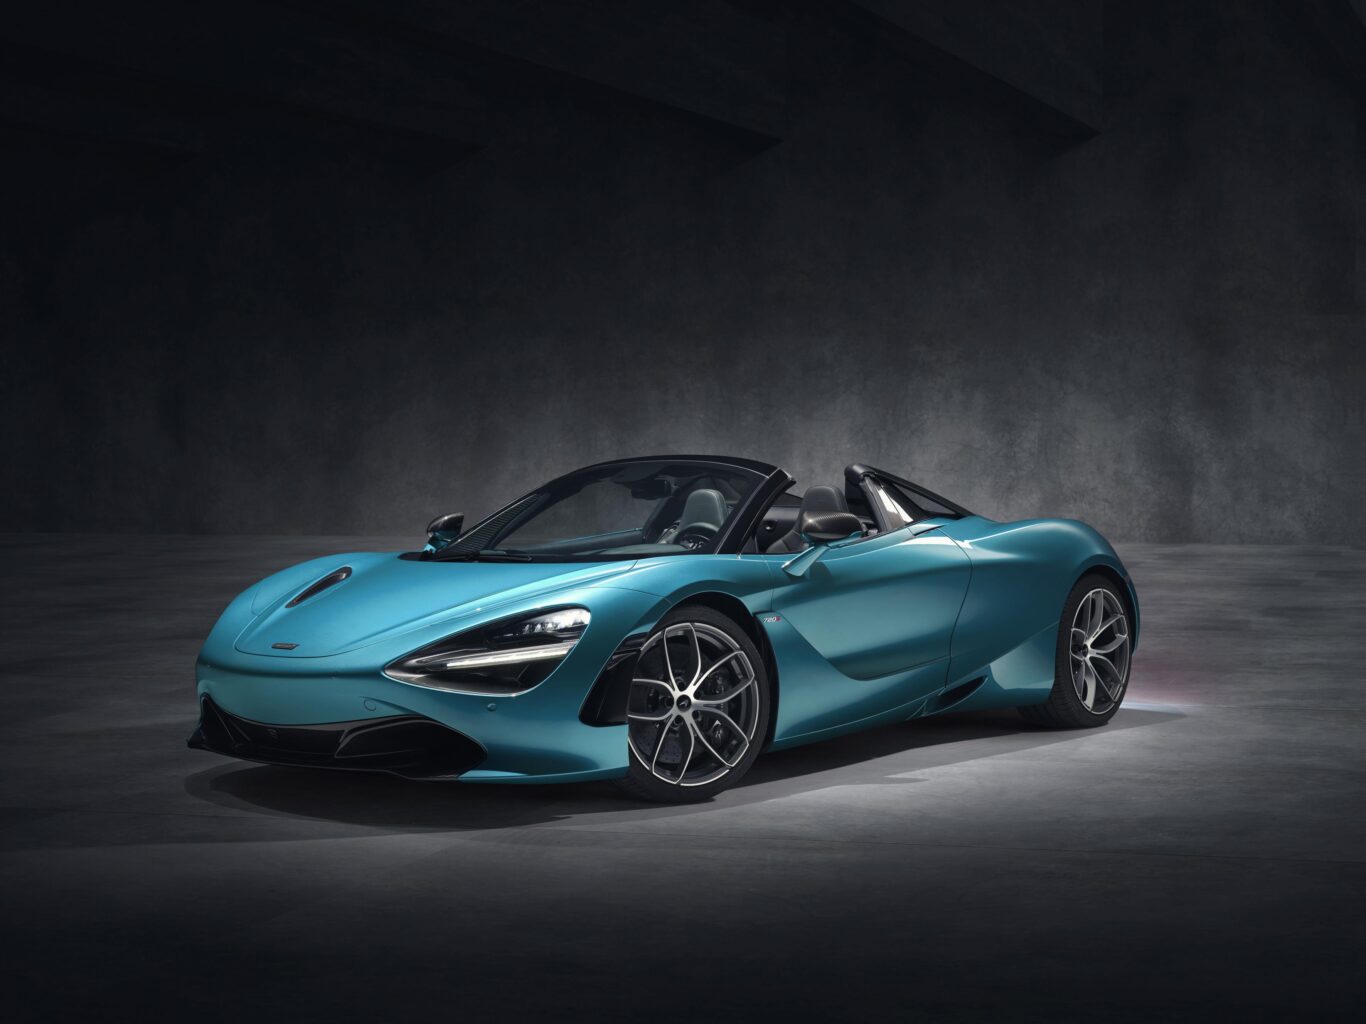 The 720s Spider is enormously powerful